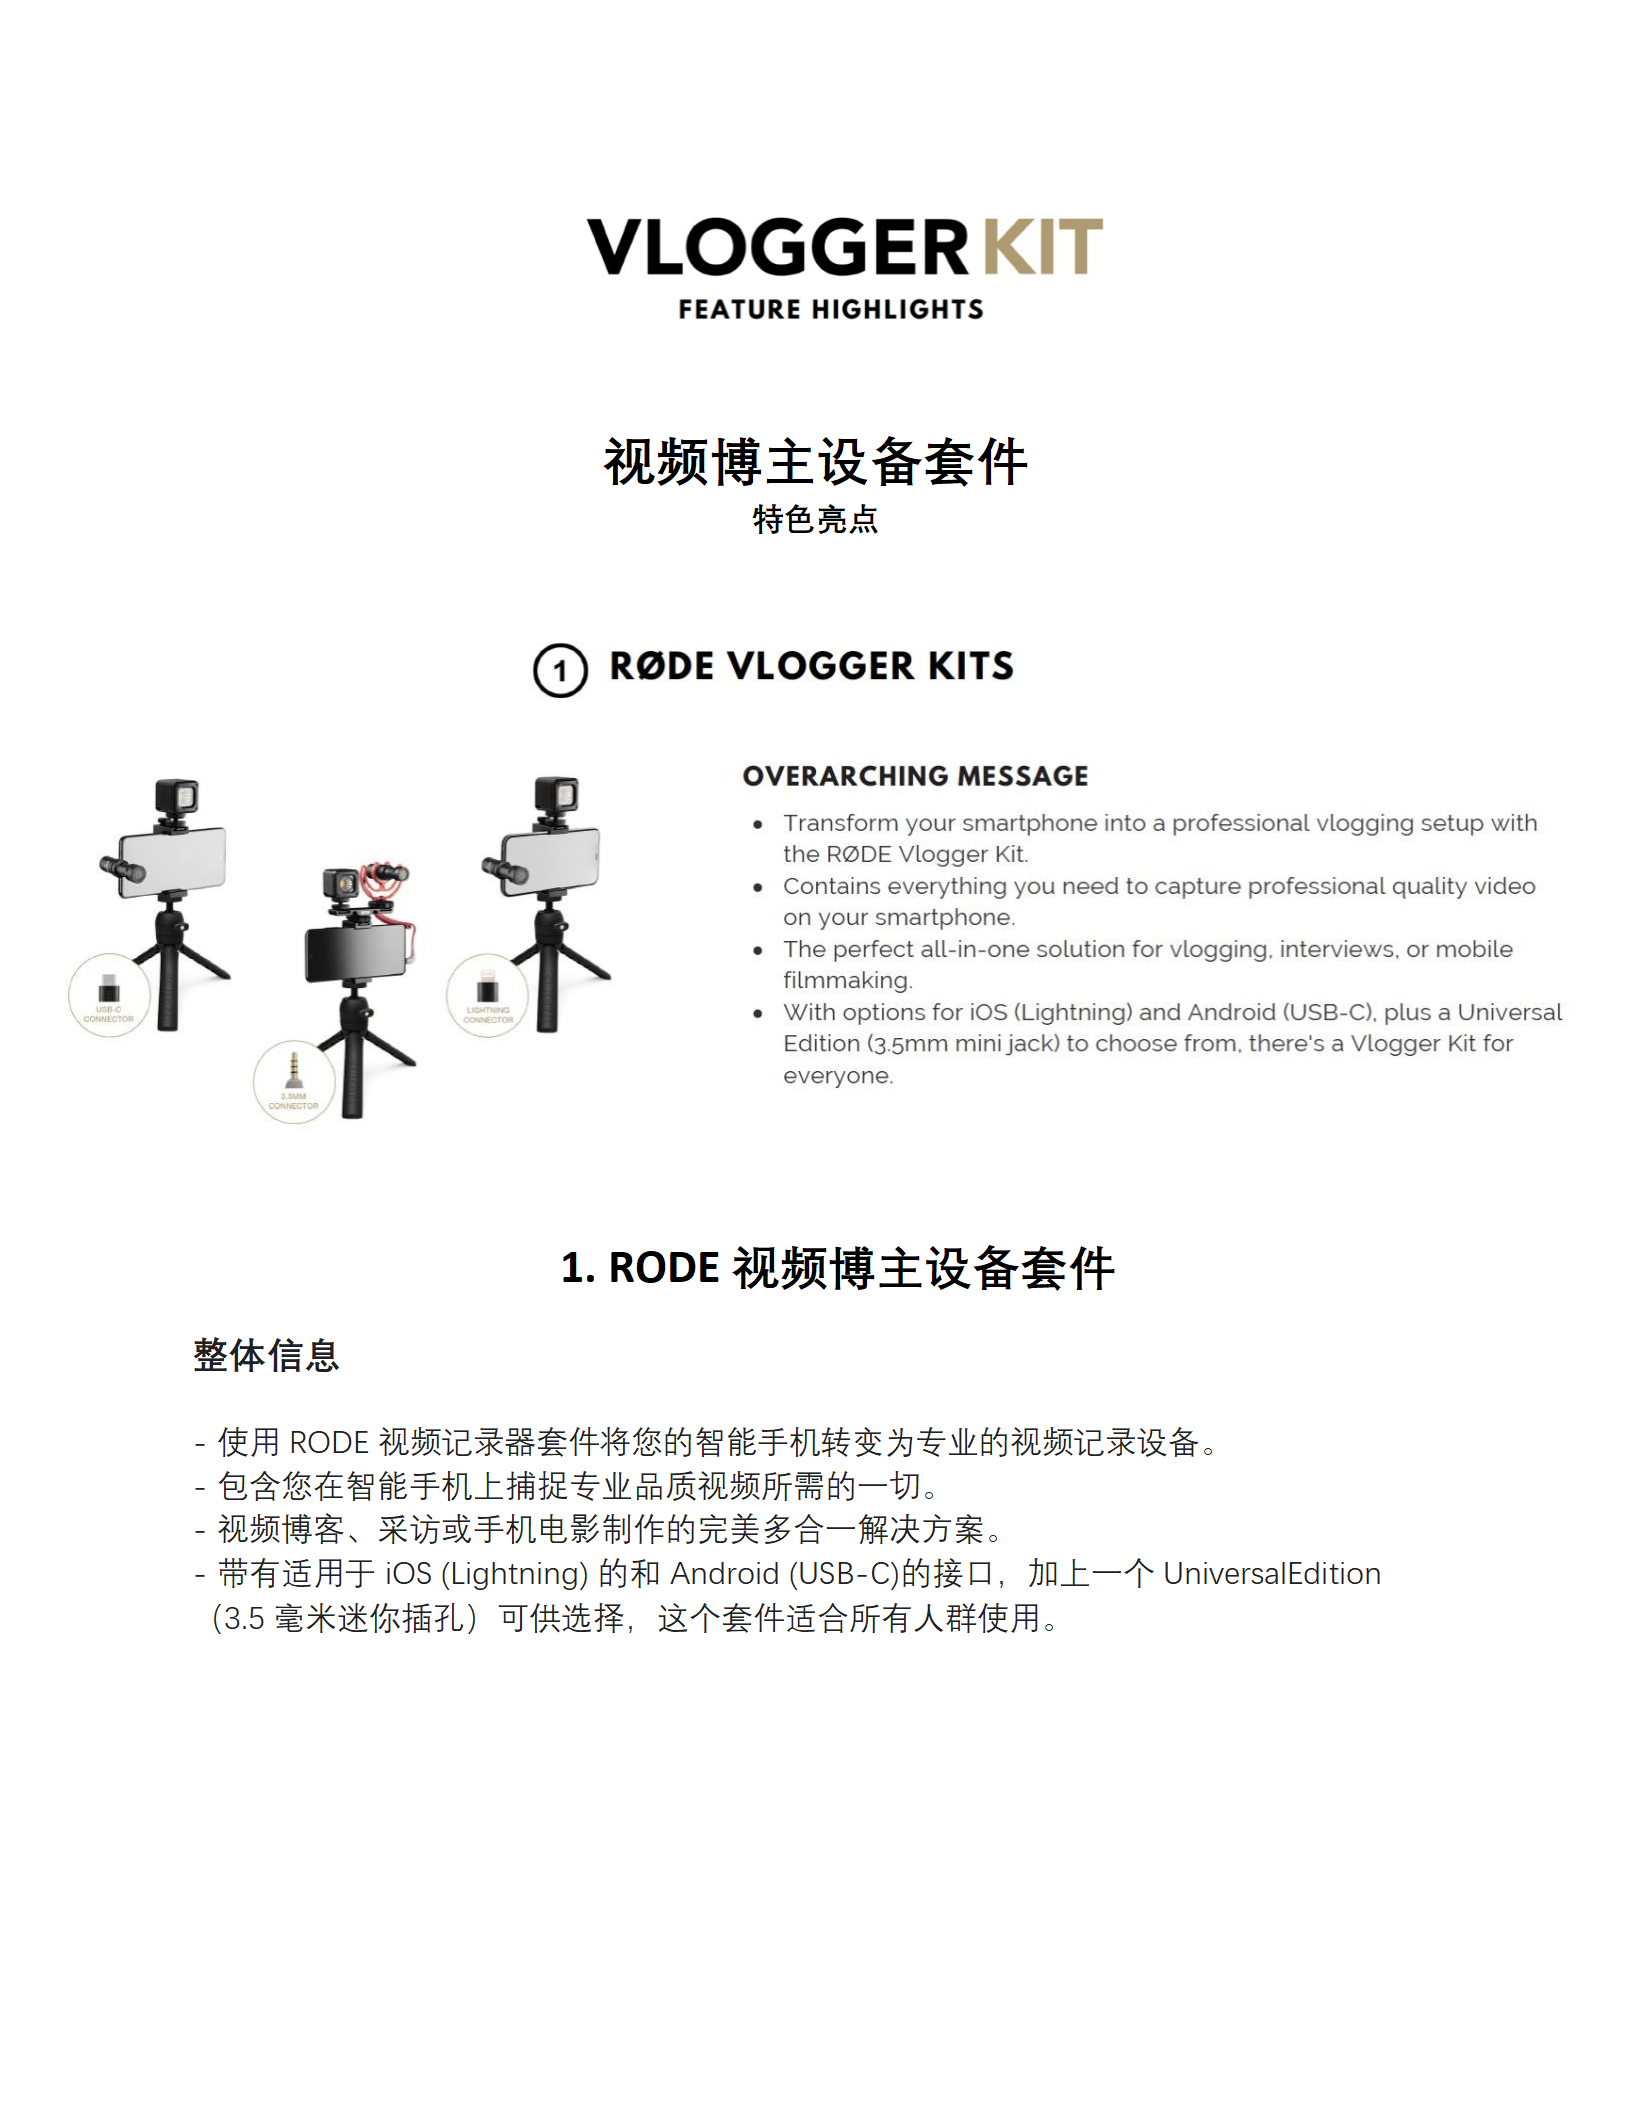 Vlogger Kit Feature Highlights and Explainer 中英_01.png